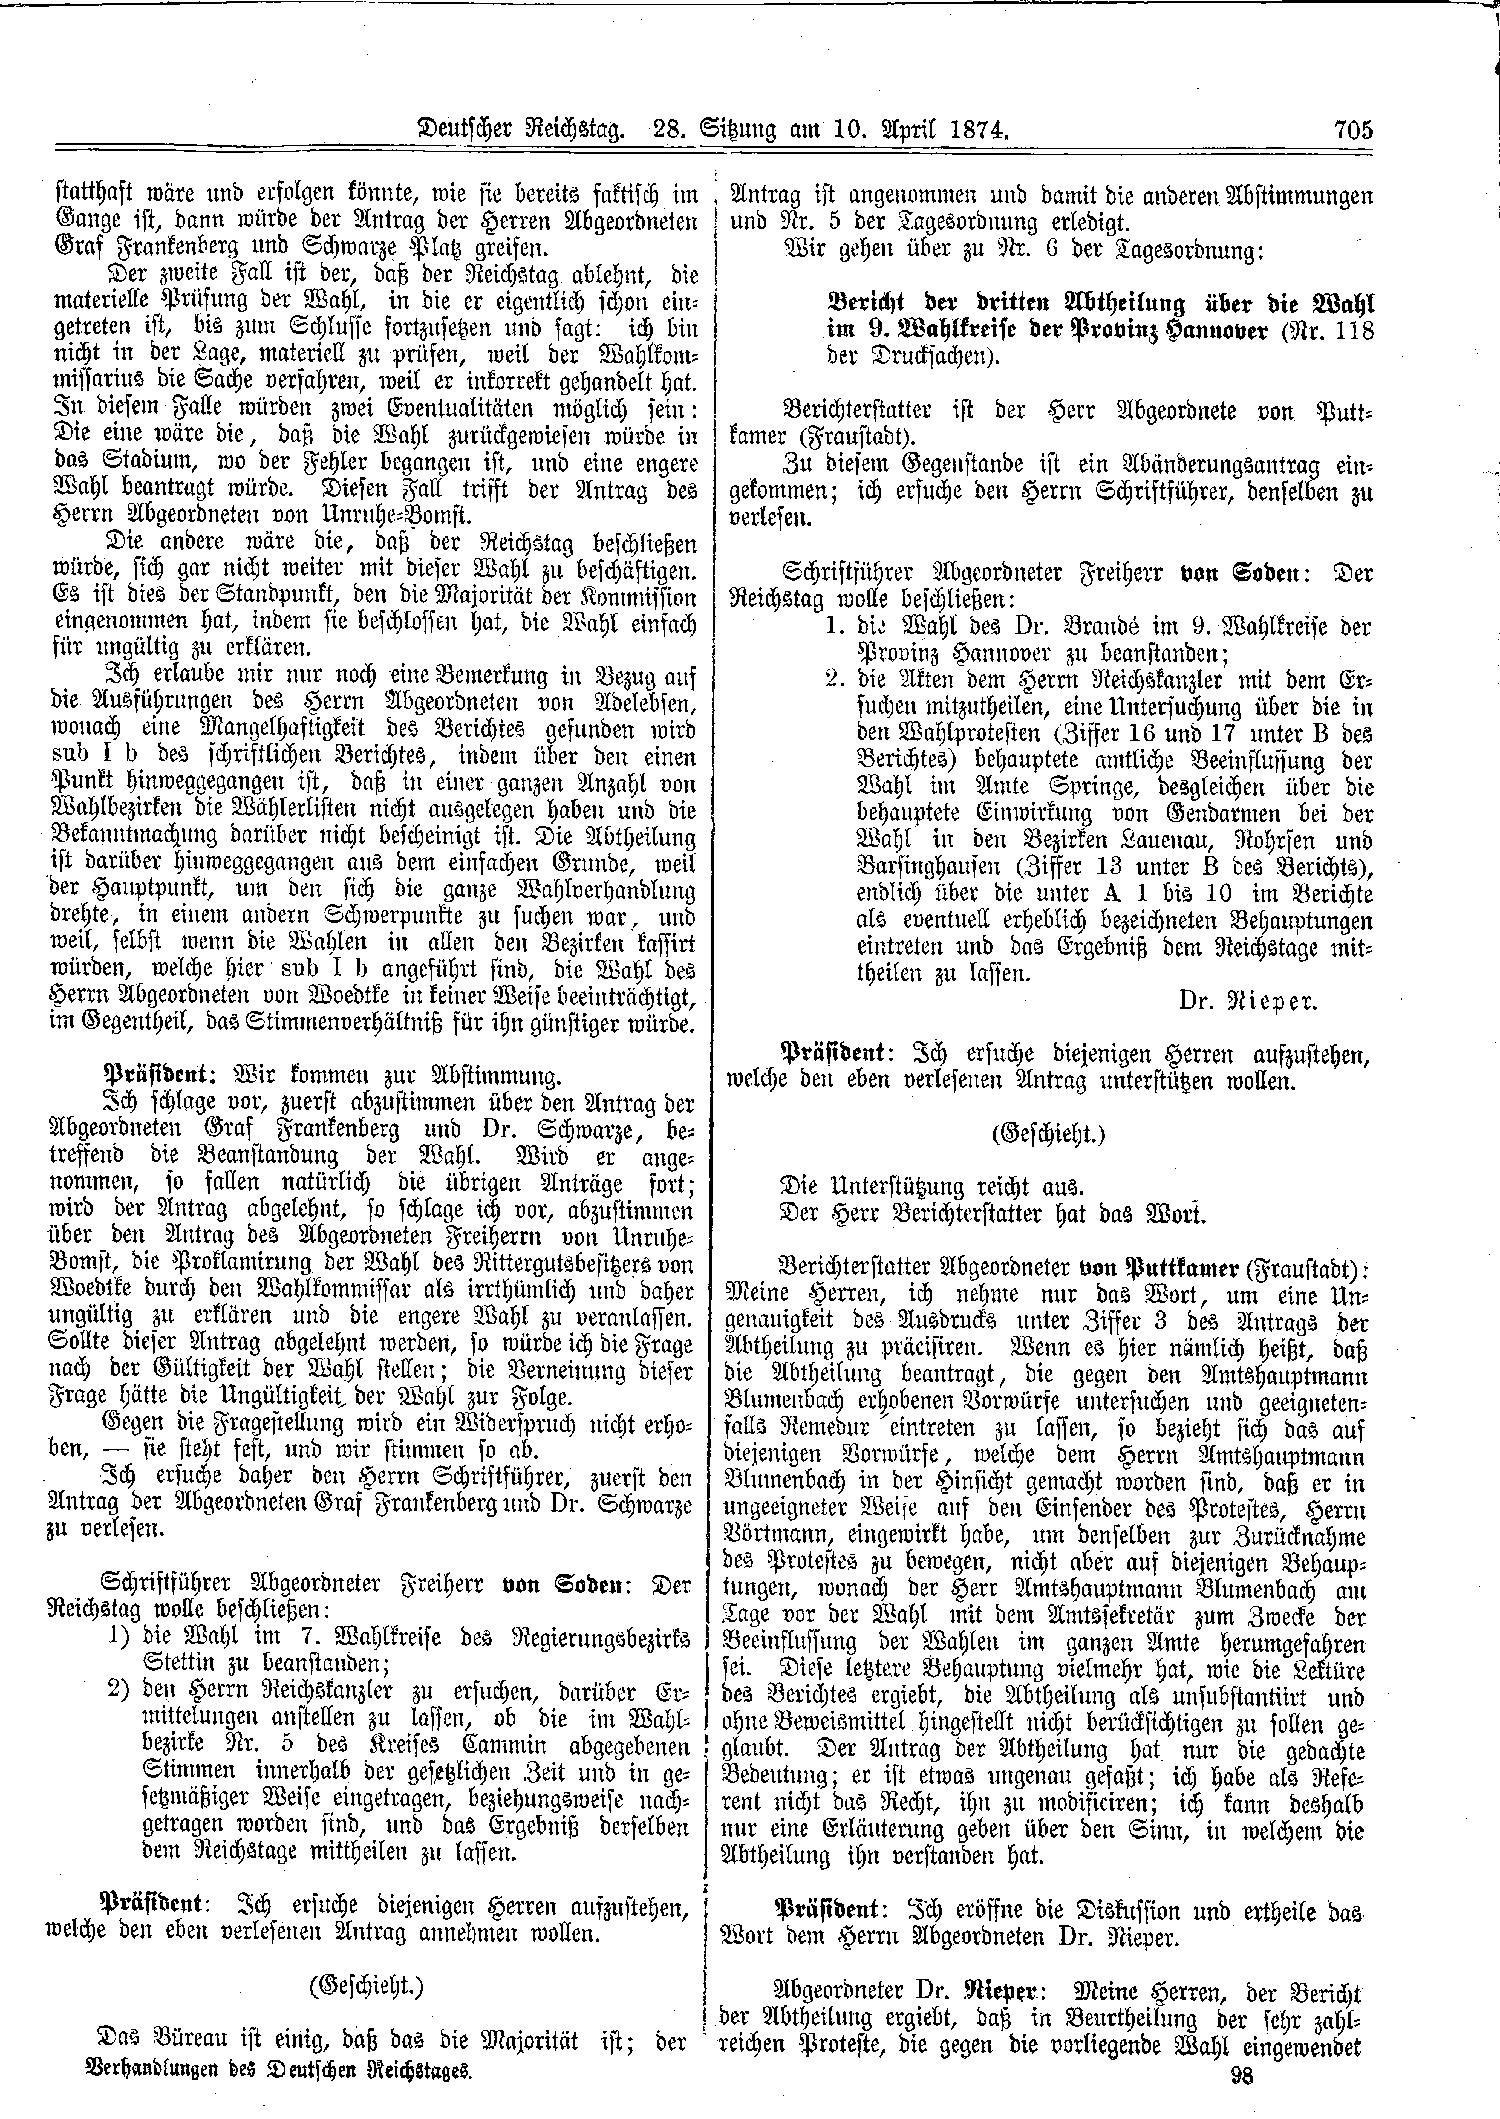 Scan of page 705